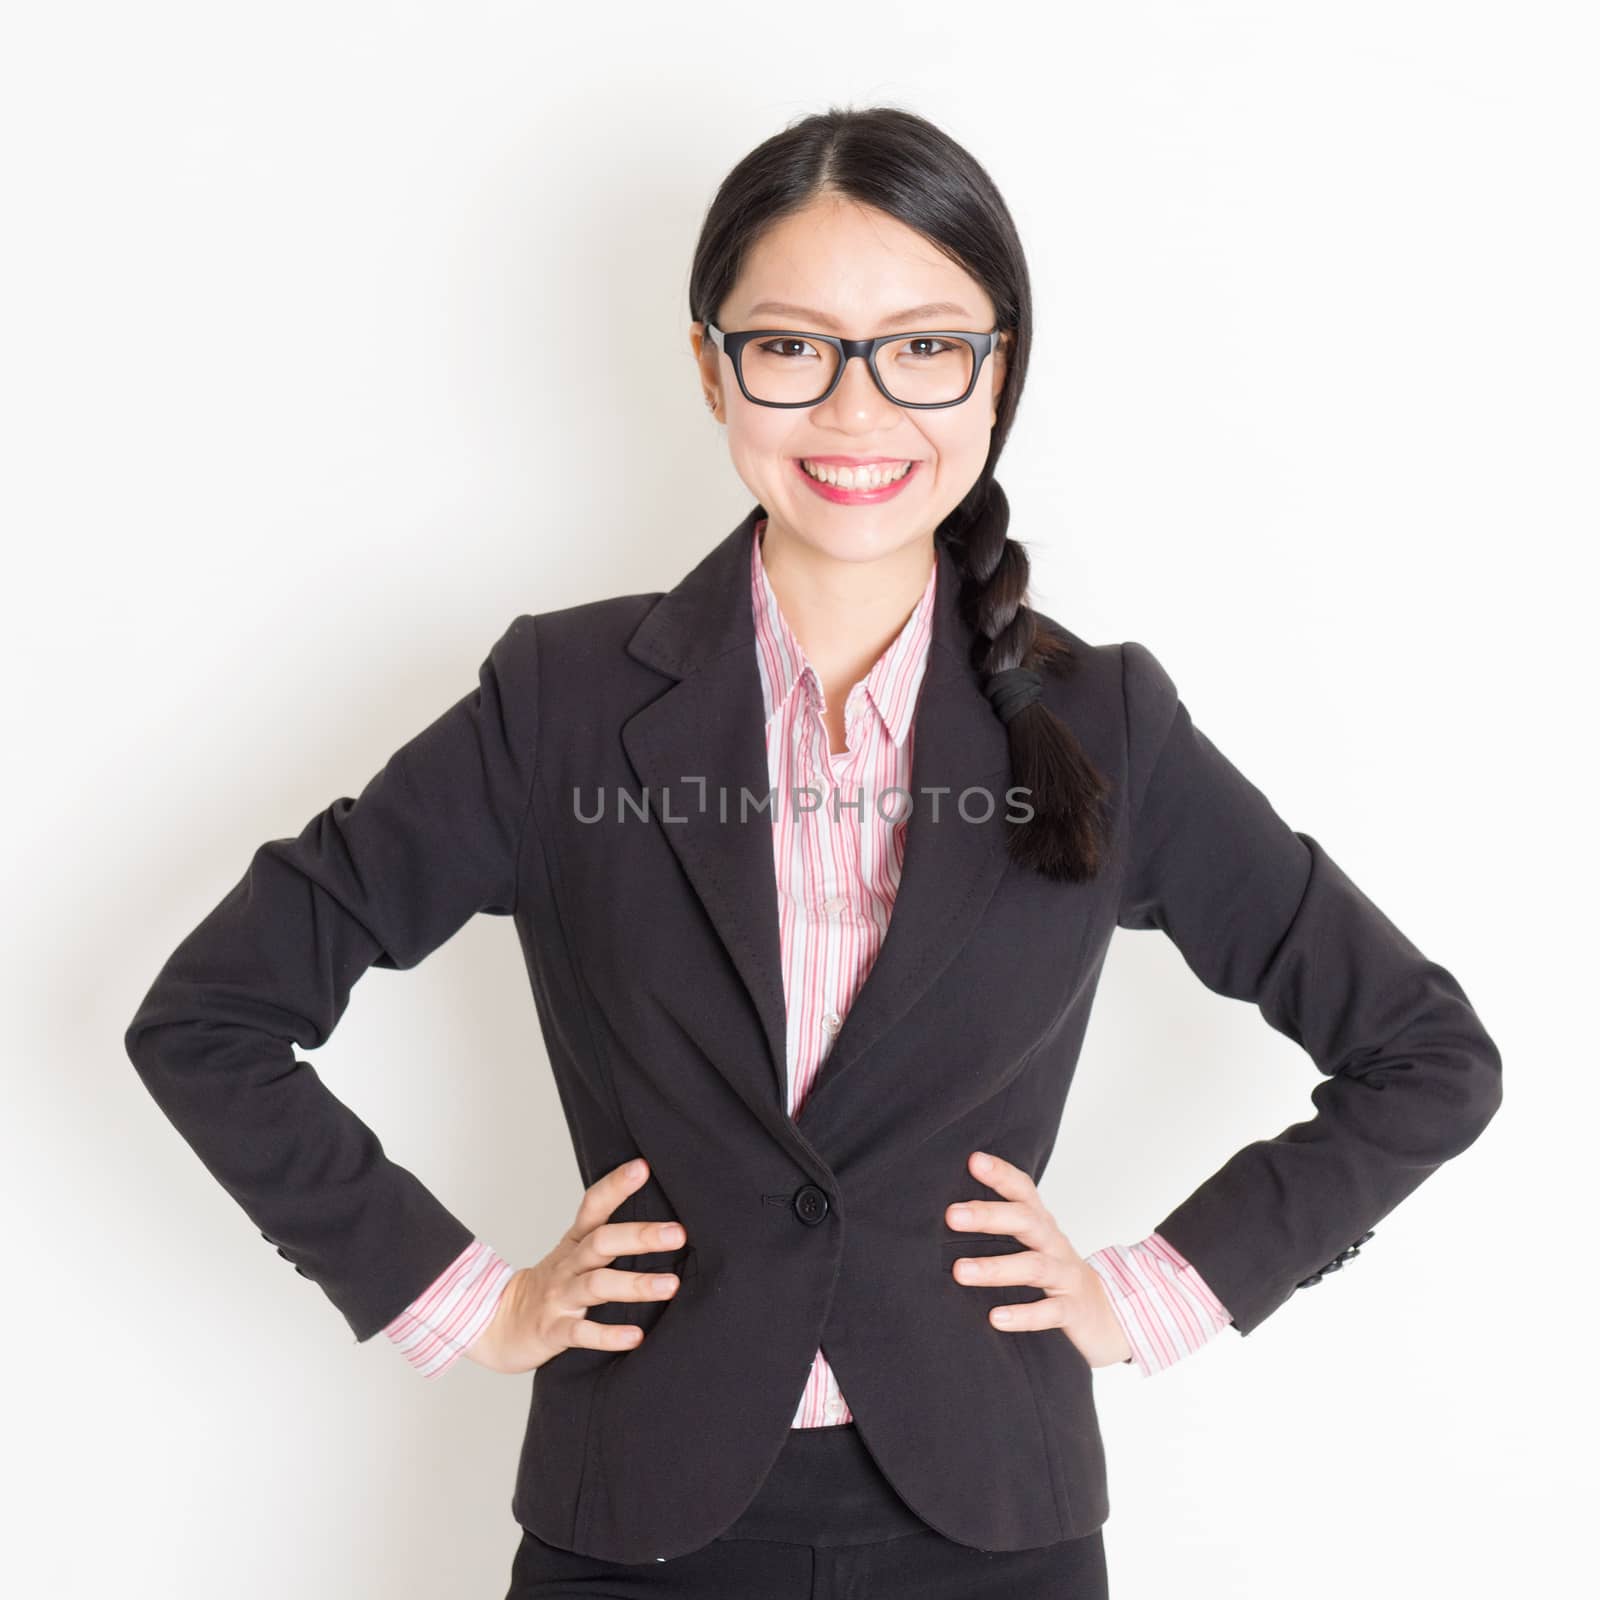 Portrait of Asian business woman in formalwear smiling and looking at camera, standing on plain background.